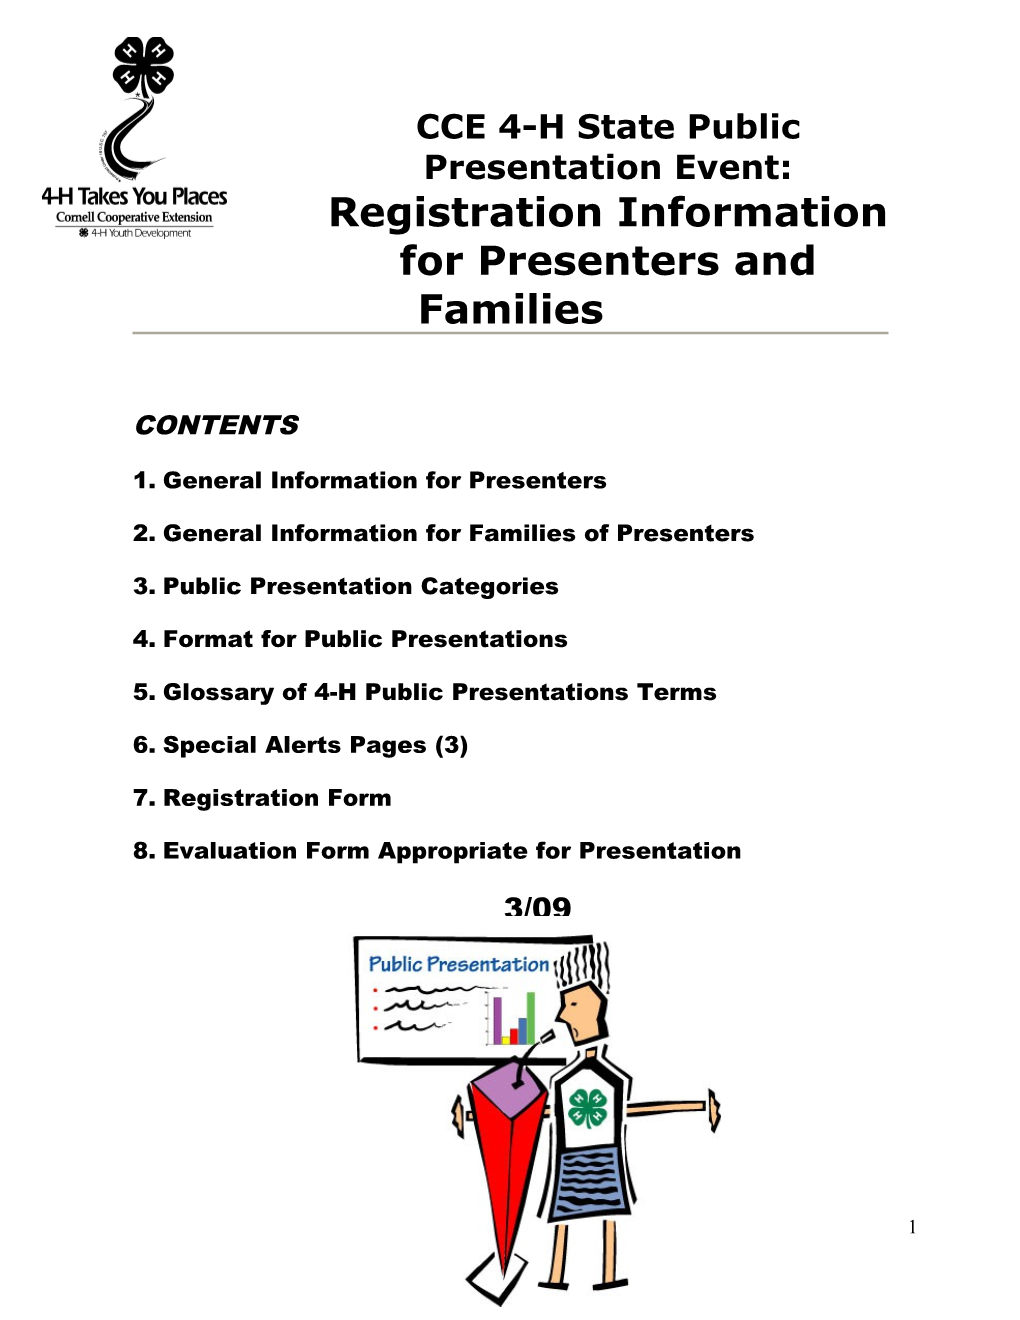 CCE 4-H State Public Presentation Event:Registration Information for Presenters and Families